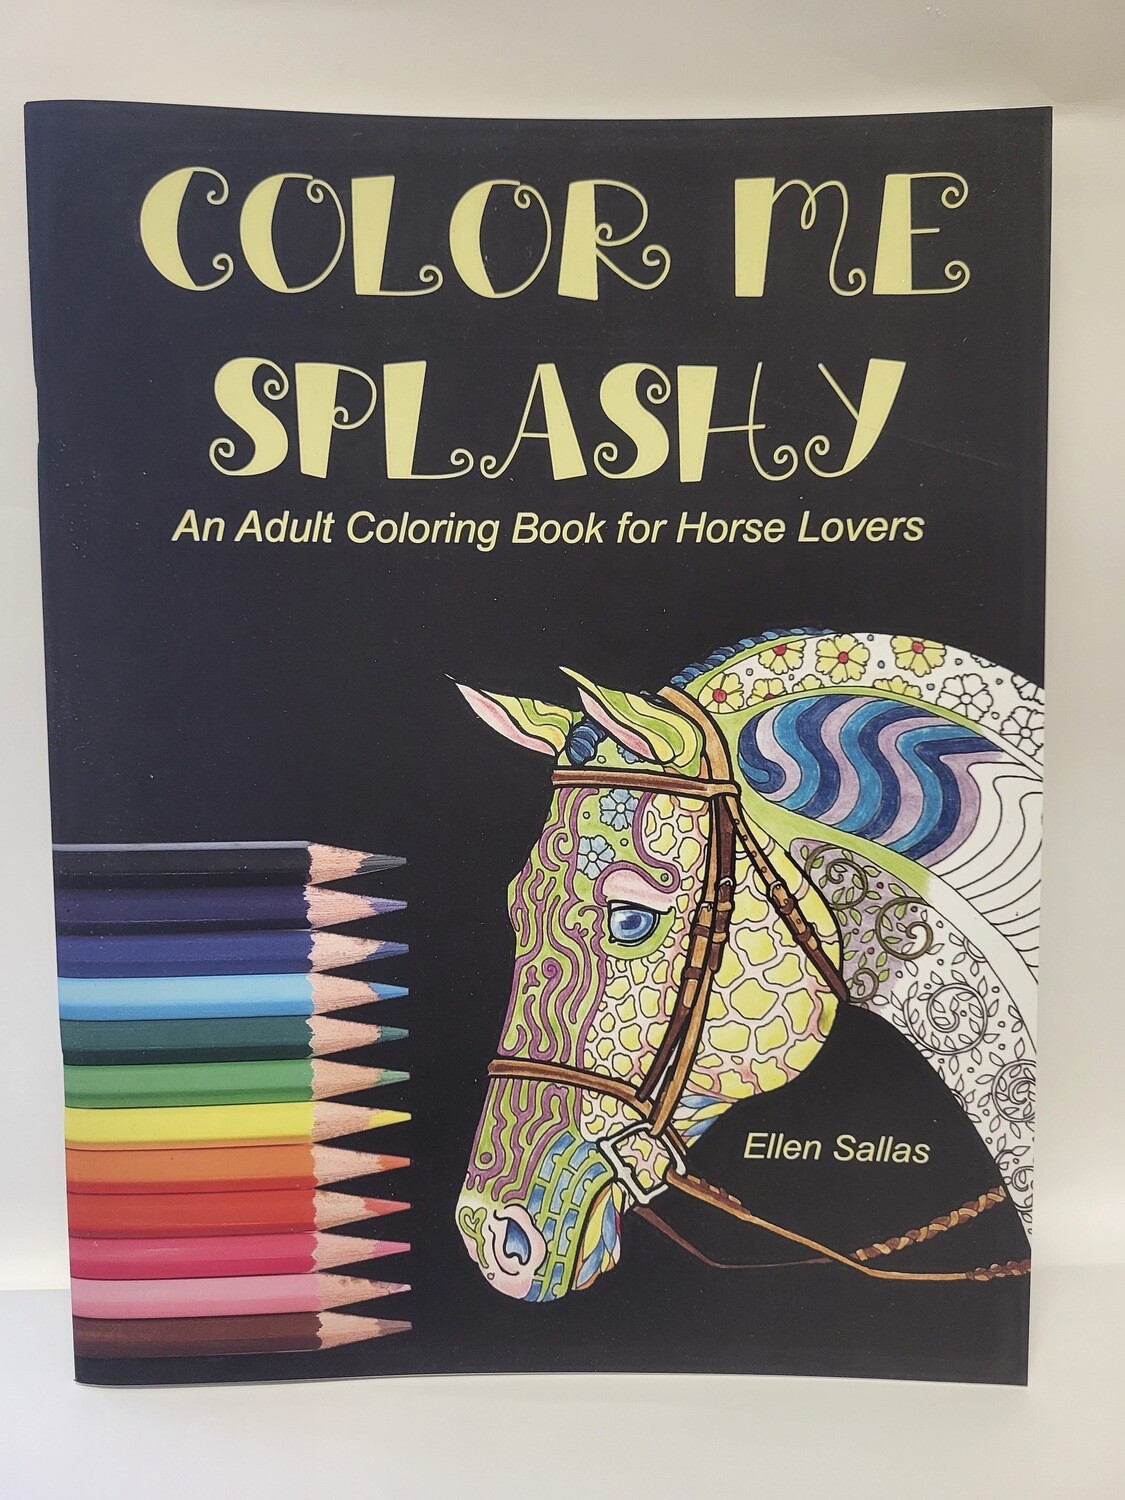 Coloring Book - Color Me Splashy (Adult Coloring Book)